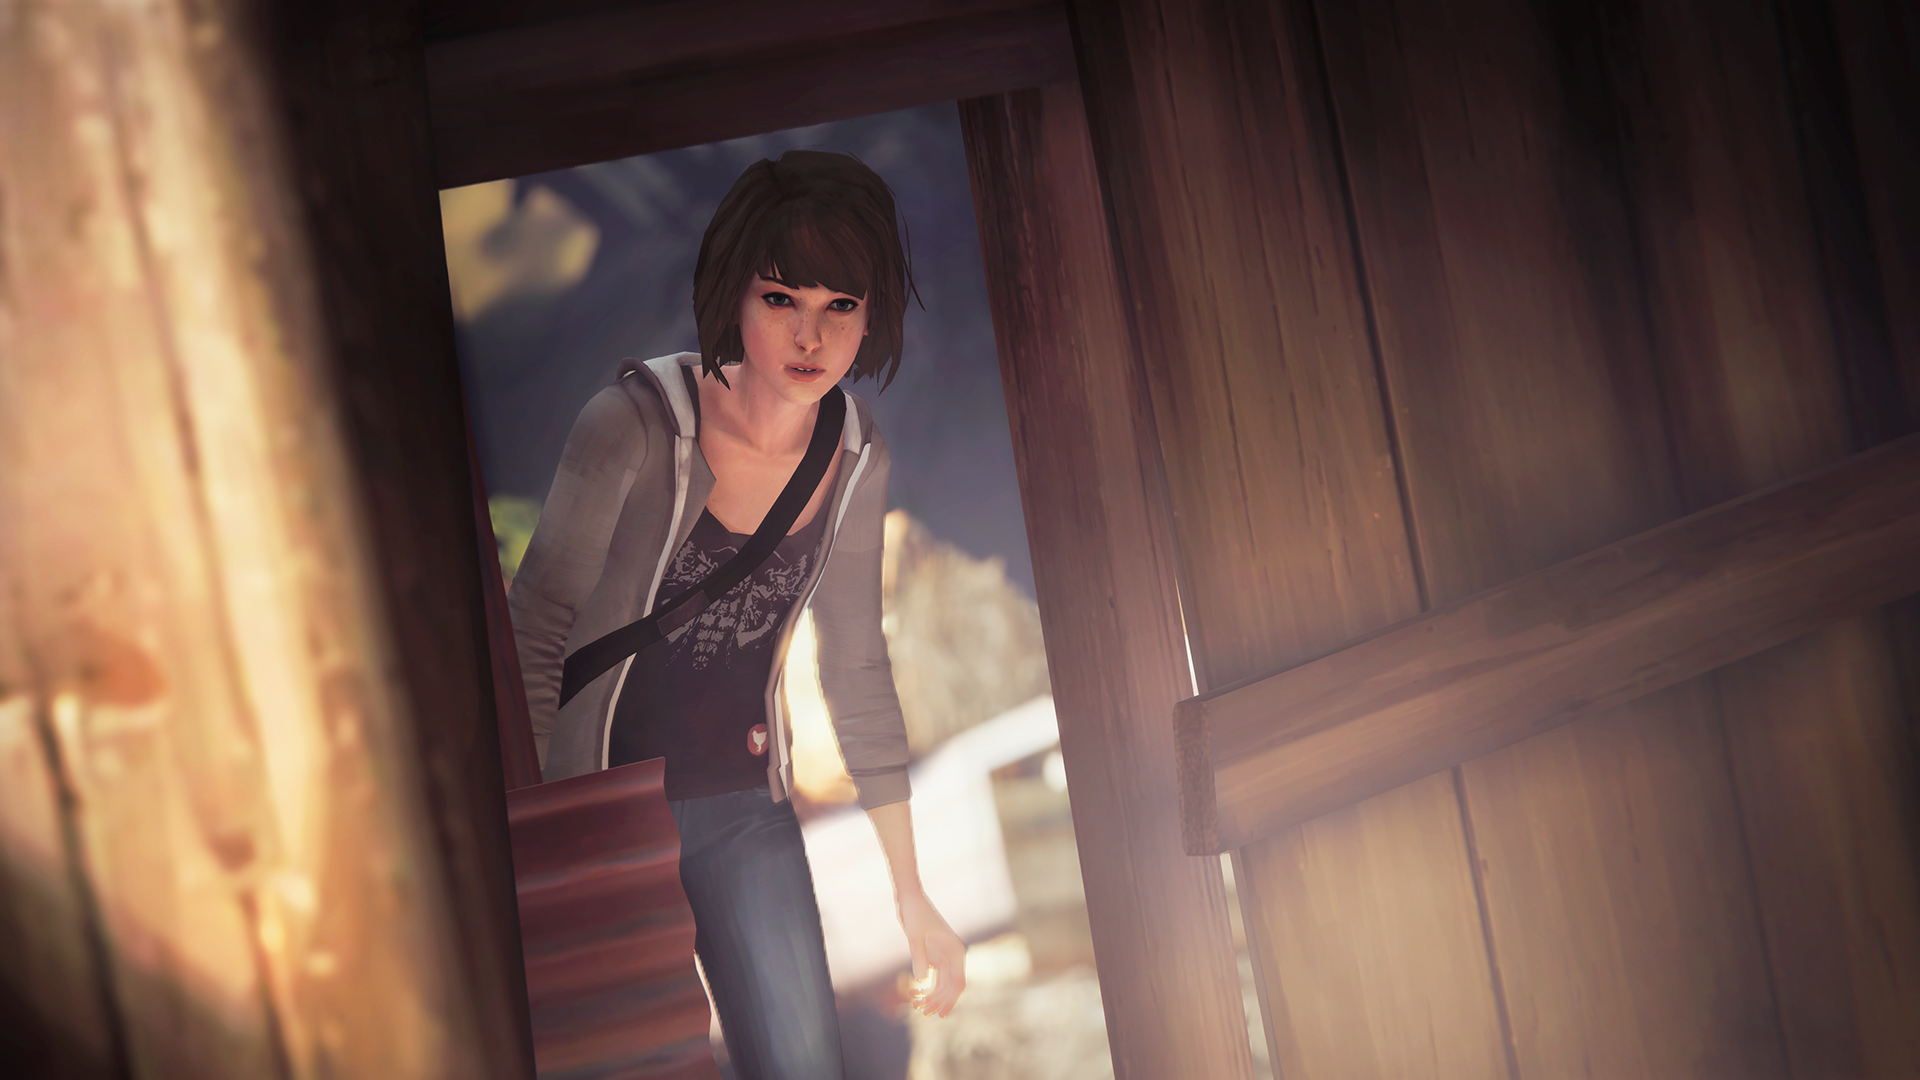 andrew r stearns recommends max caulfield porn pic